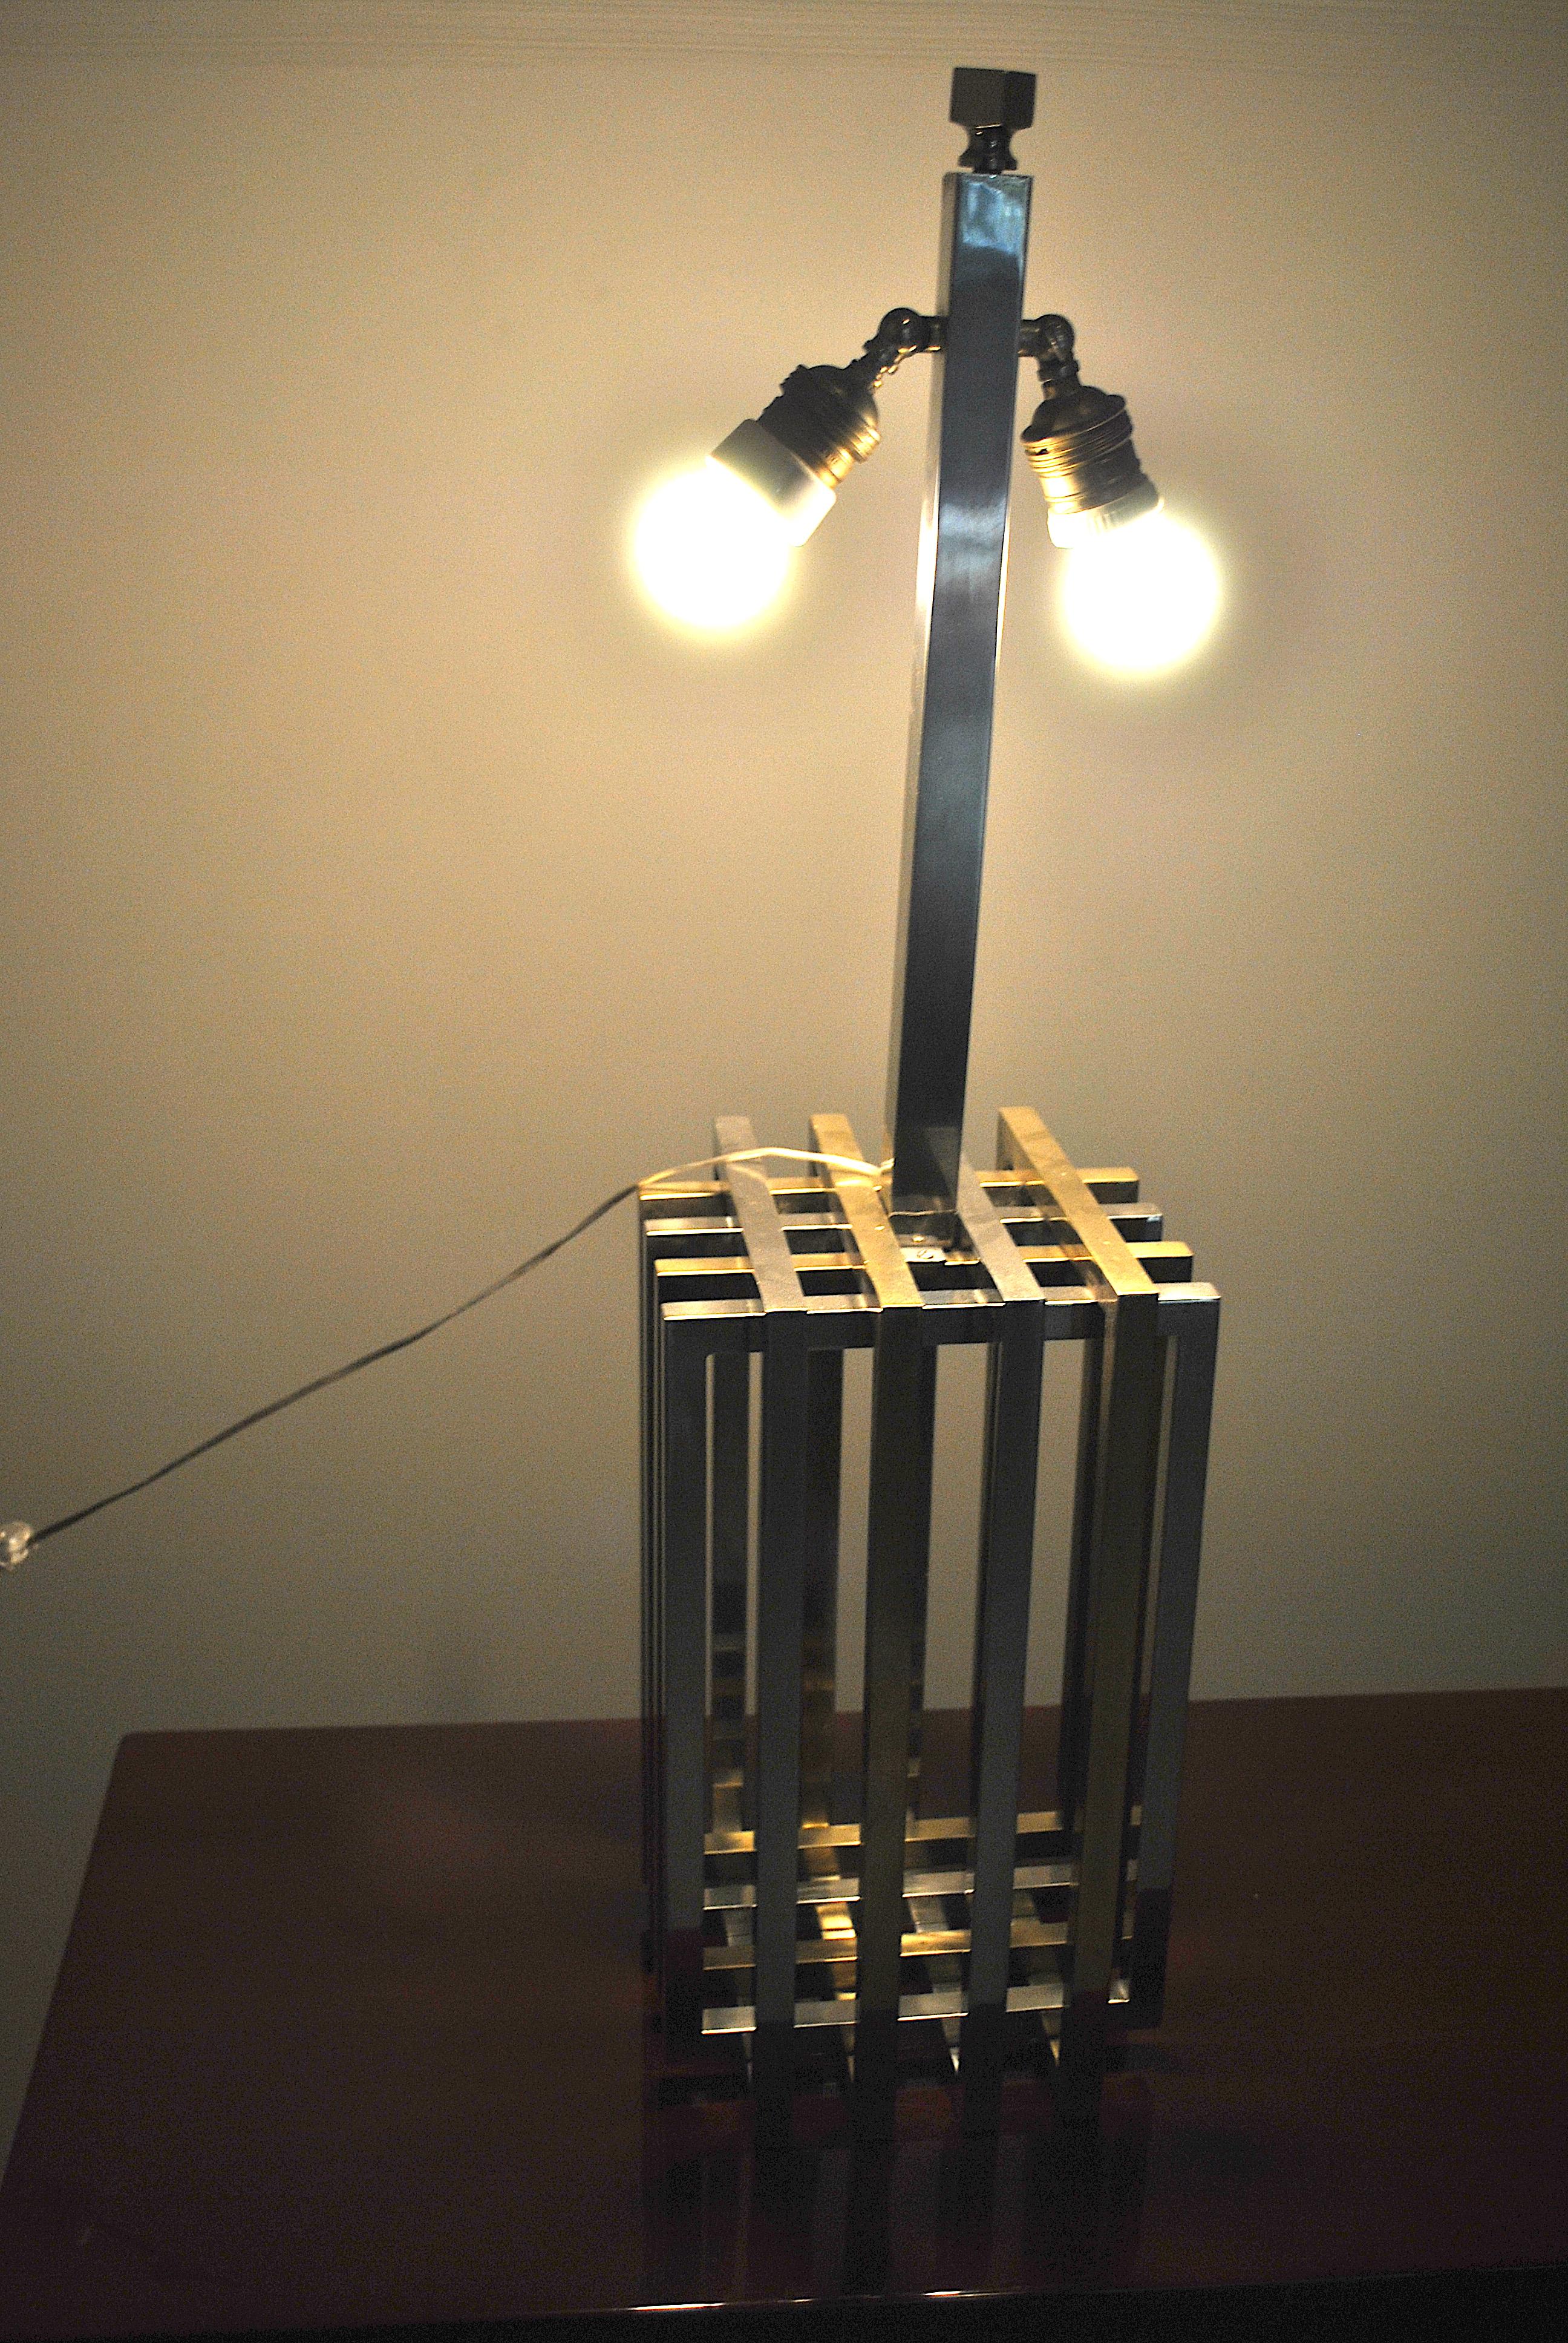 Romeo Rega Italian Midcentury Table Lamp in Brass from the 1970s For Sale 4